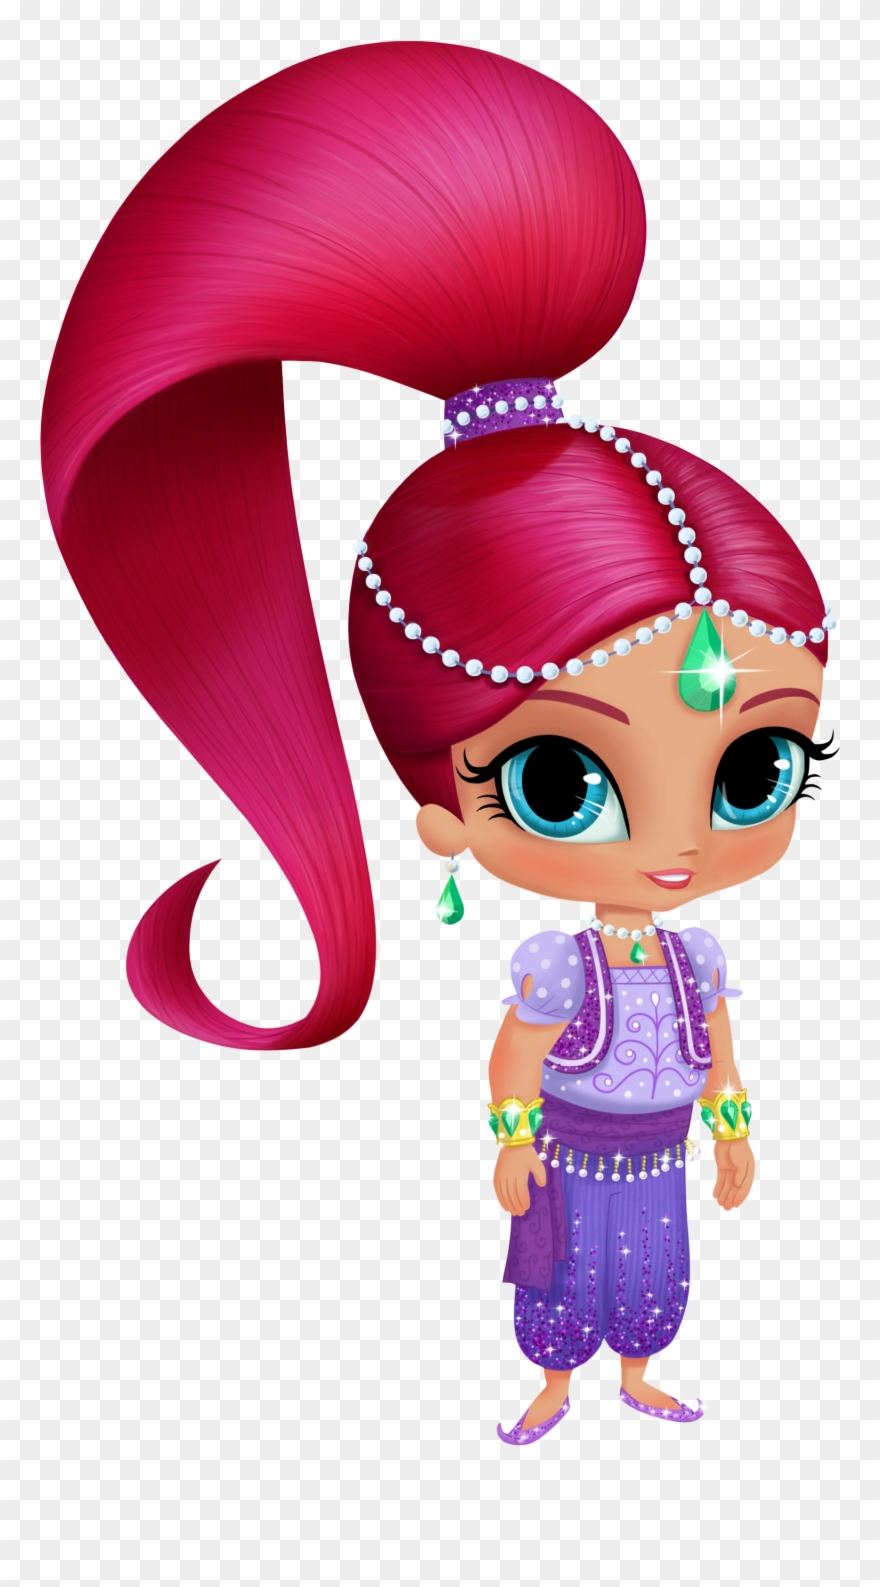 Shimmer From Shimmer And Shine Clipart (#371337).